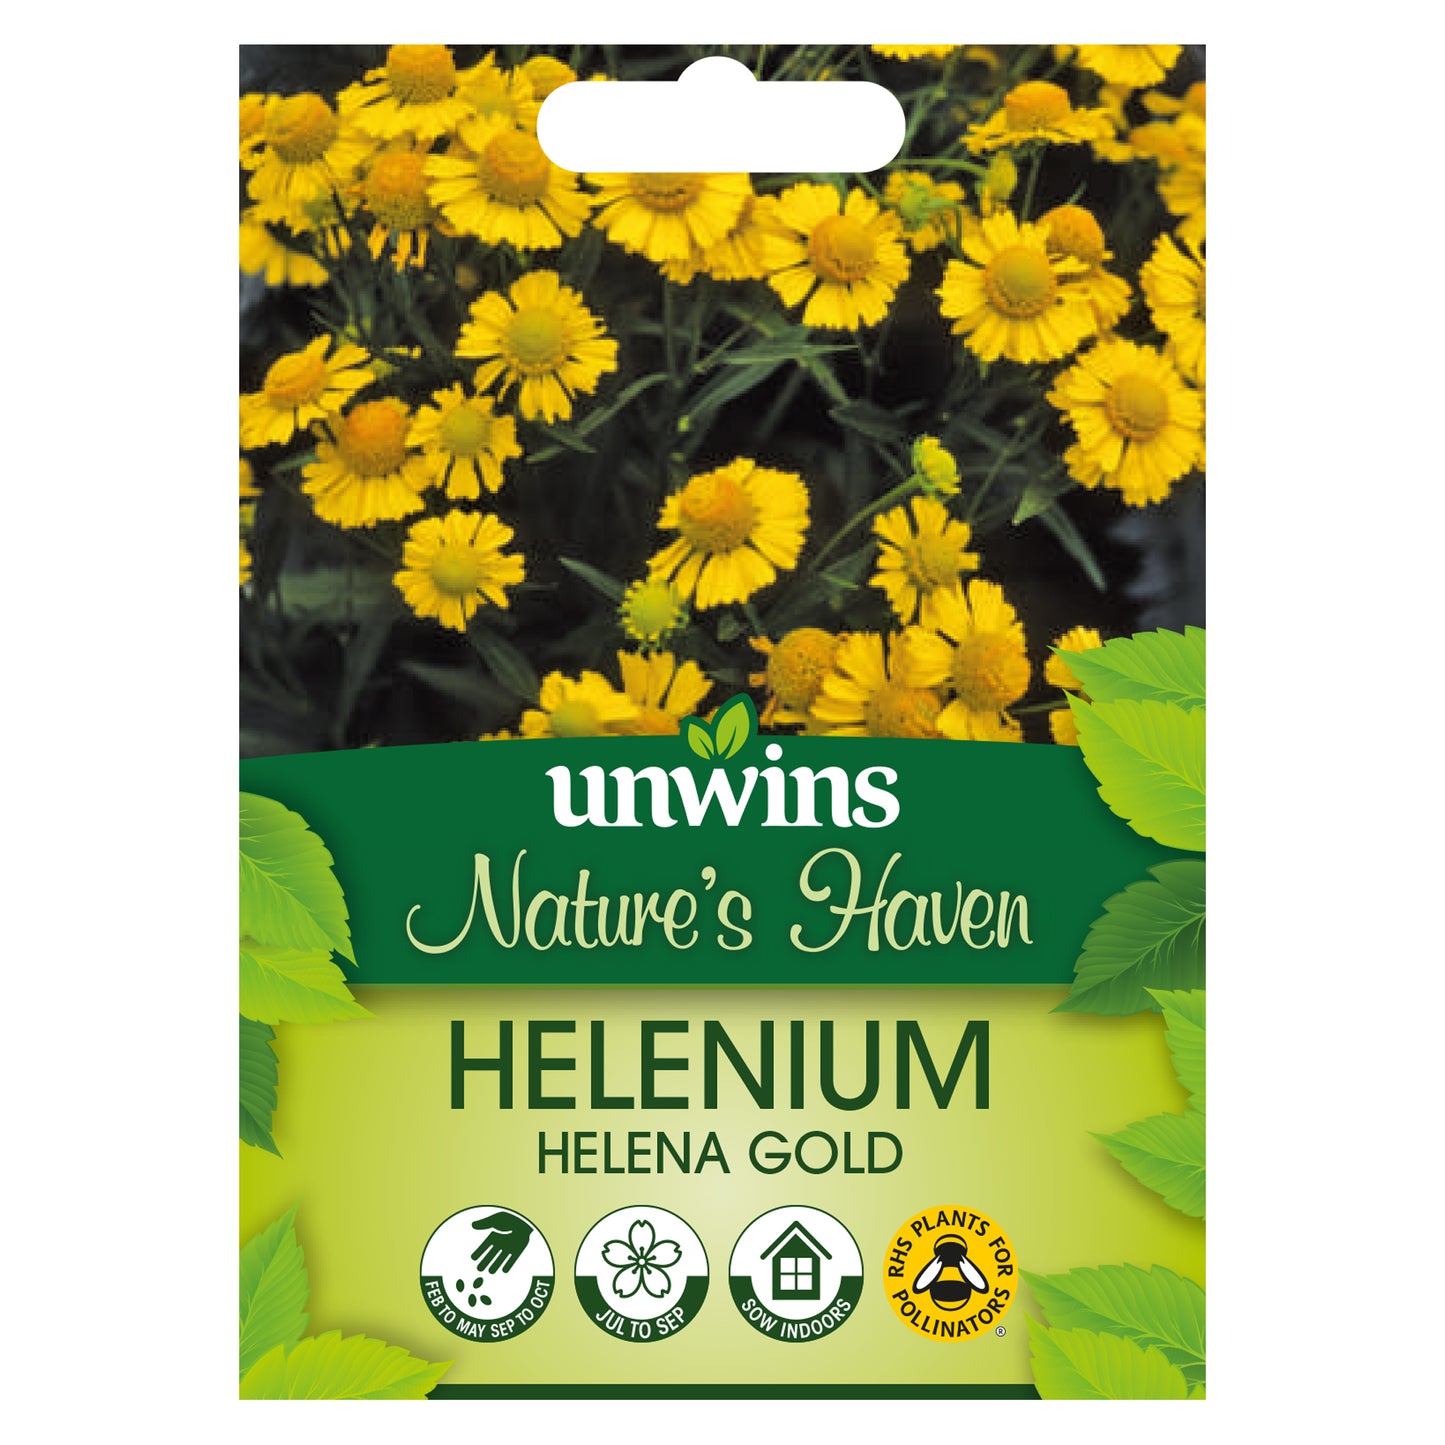 Nature's Haven Helenium Helena Gold Seeds front of pack